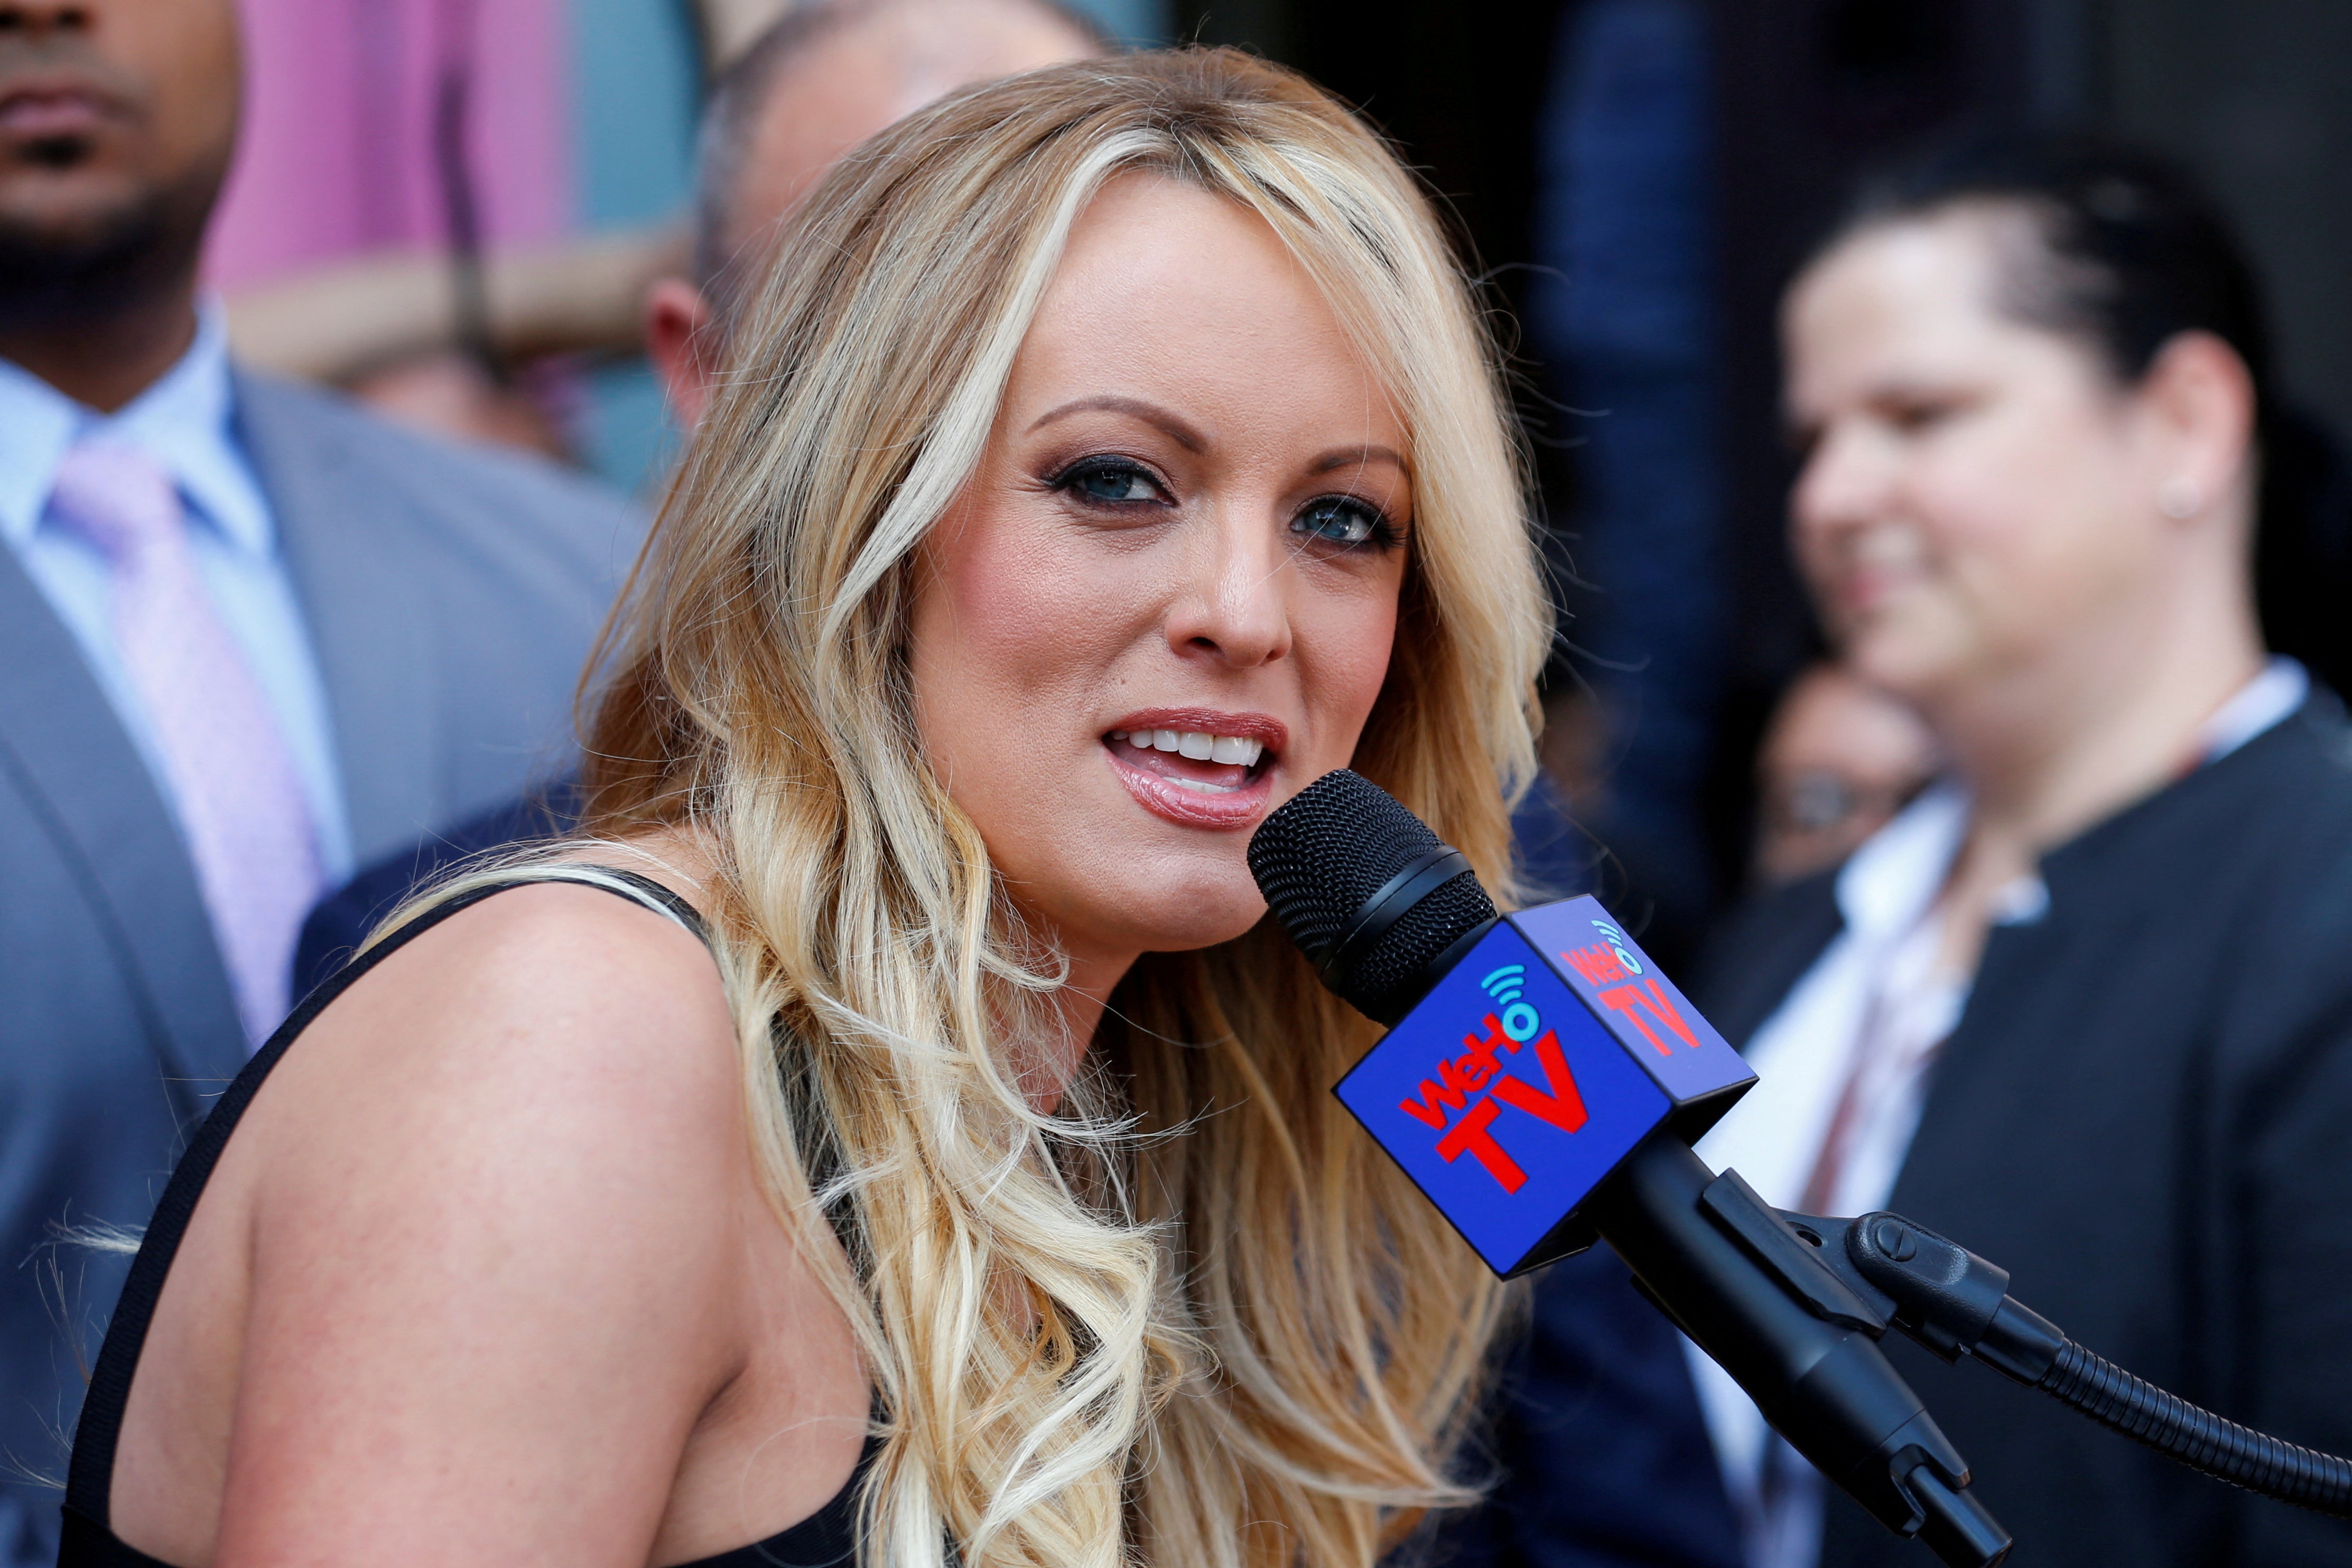 Stormy Daniels, who was paid hush money by Donald Trump’s attorney Michael Cohen under the former president’s direction, speaks to reporters in 2018.